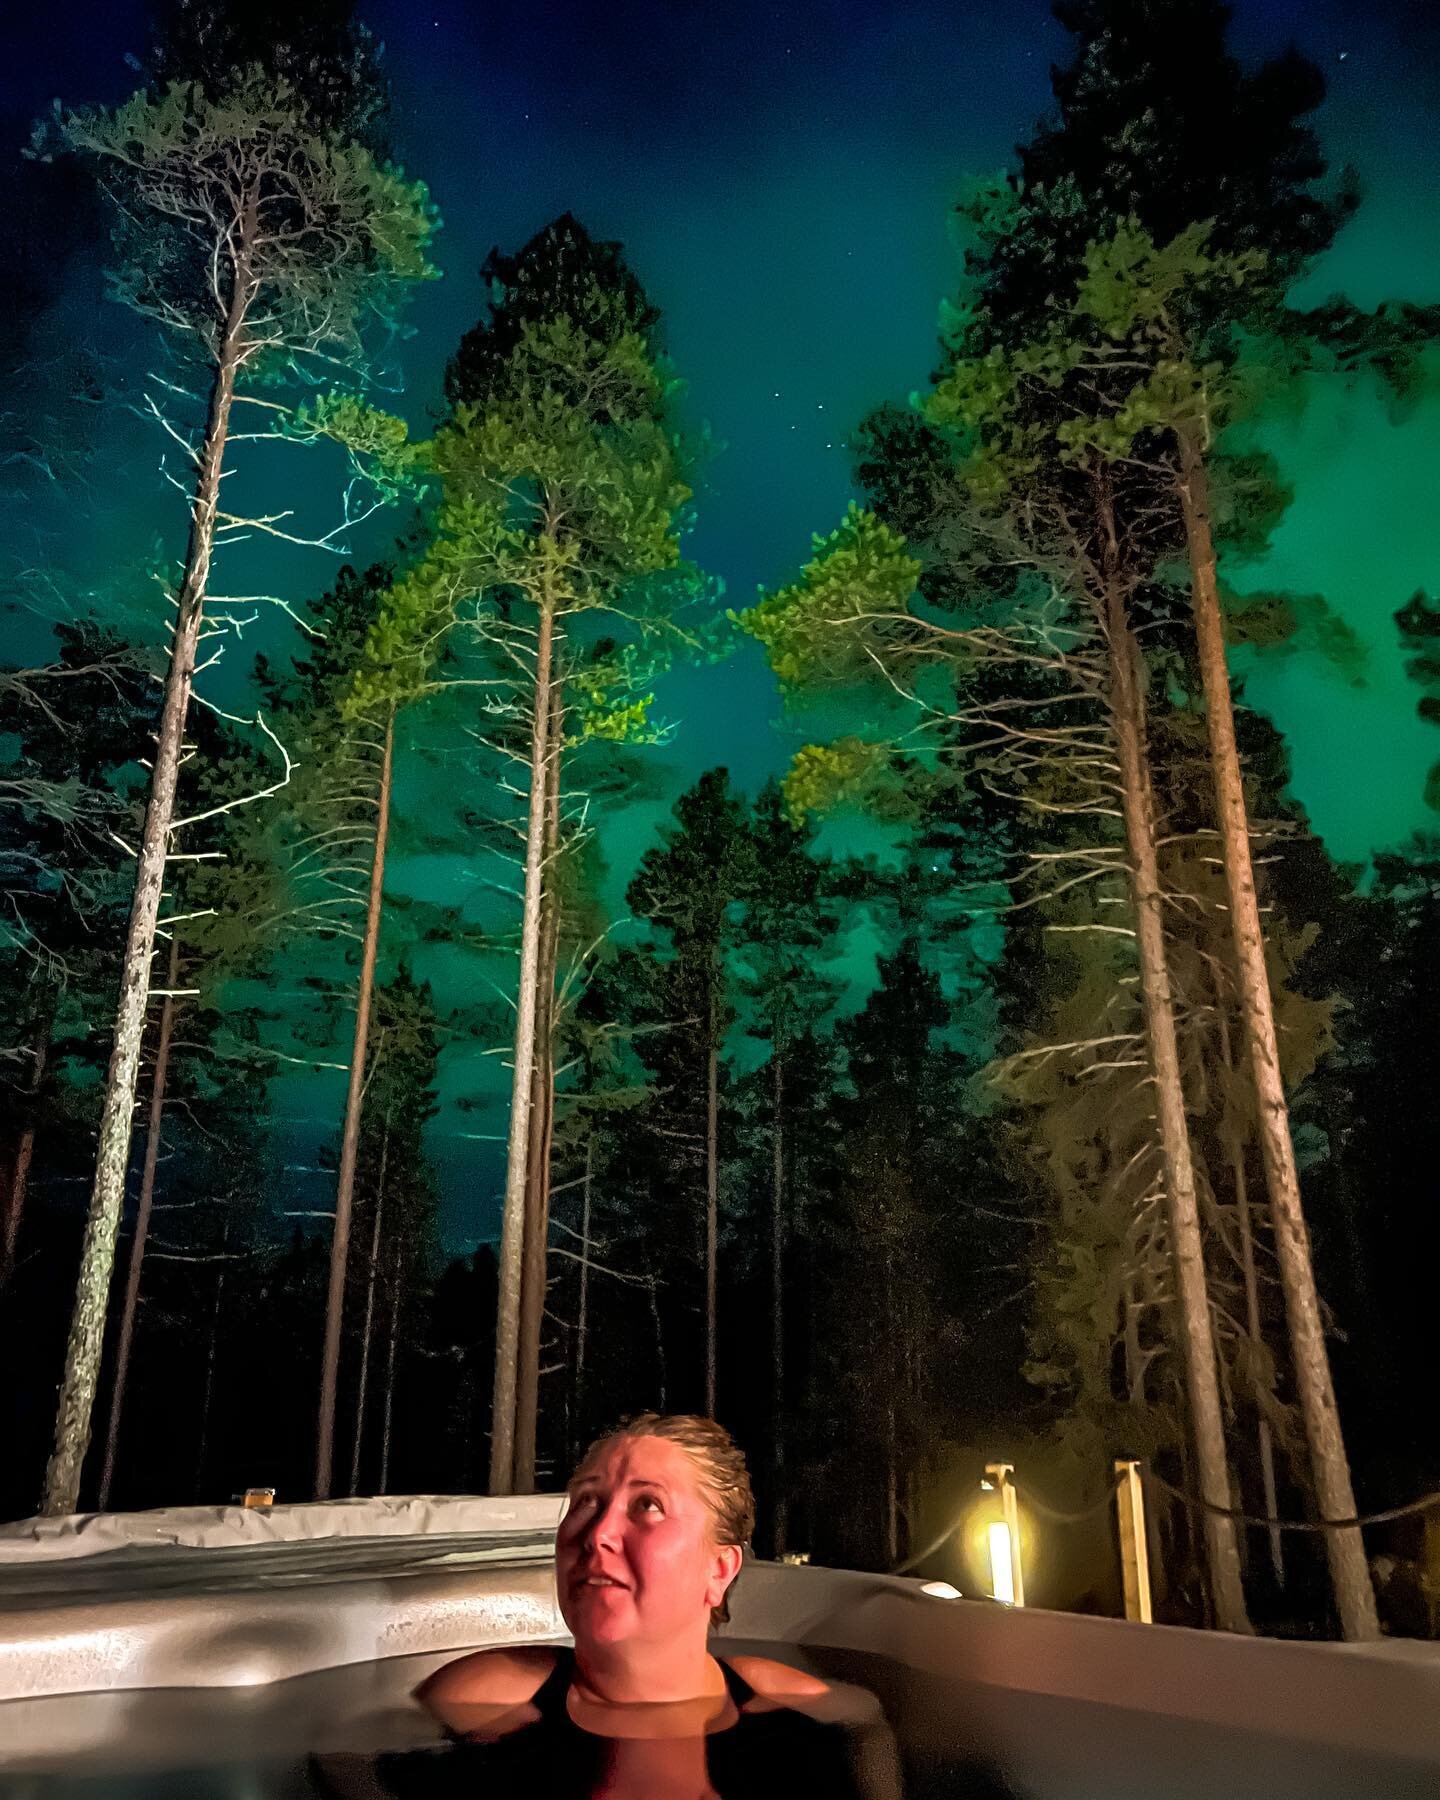 There is nothing more romantic than watching the Northern Lights while floating on your own personal jacuzzi ❤️

#cottage #romantichotel #honeymoon #northernlights #auroraborealis #laplandromance #romanticgetaway #wedding #weddinginspiration #wedding